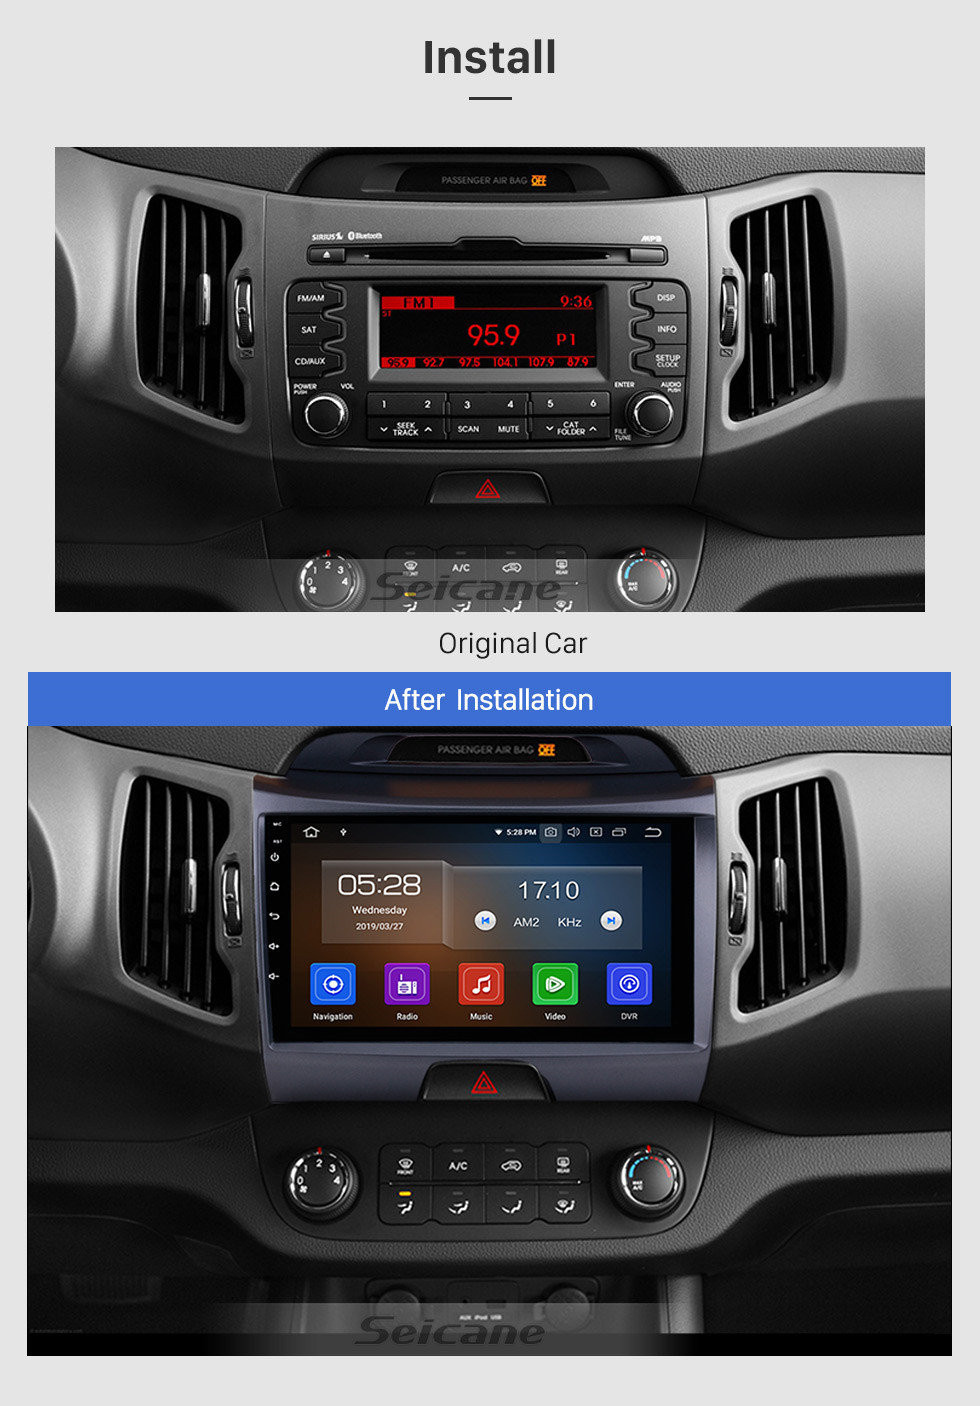 Seicane 9 Inch Android 11.0 Touch Screen radio Bluetooth GPS Navigation system For 2011-2015 KIA Sportage R with TPMS DVR OBD II USB SD  WiFi Rear camera Steering Wheel Control HD 1080P Video AUX